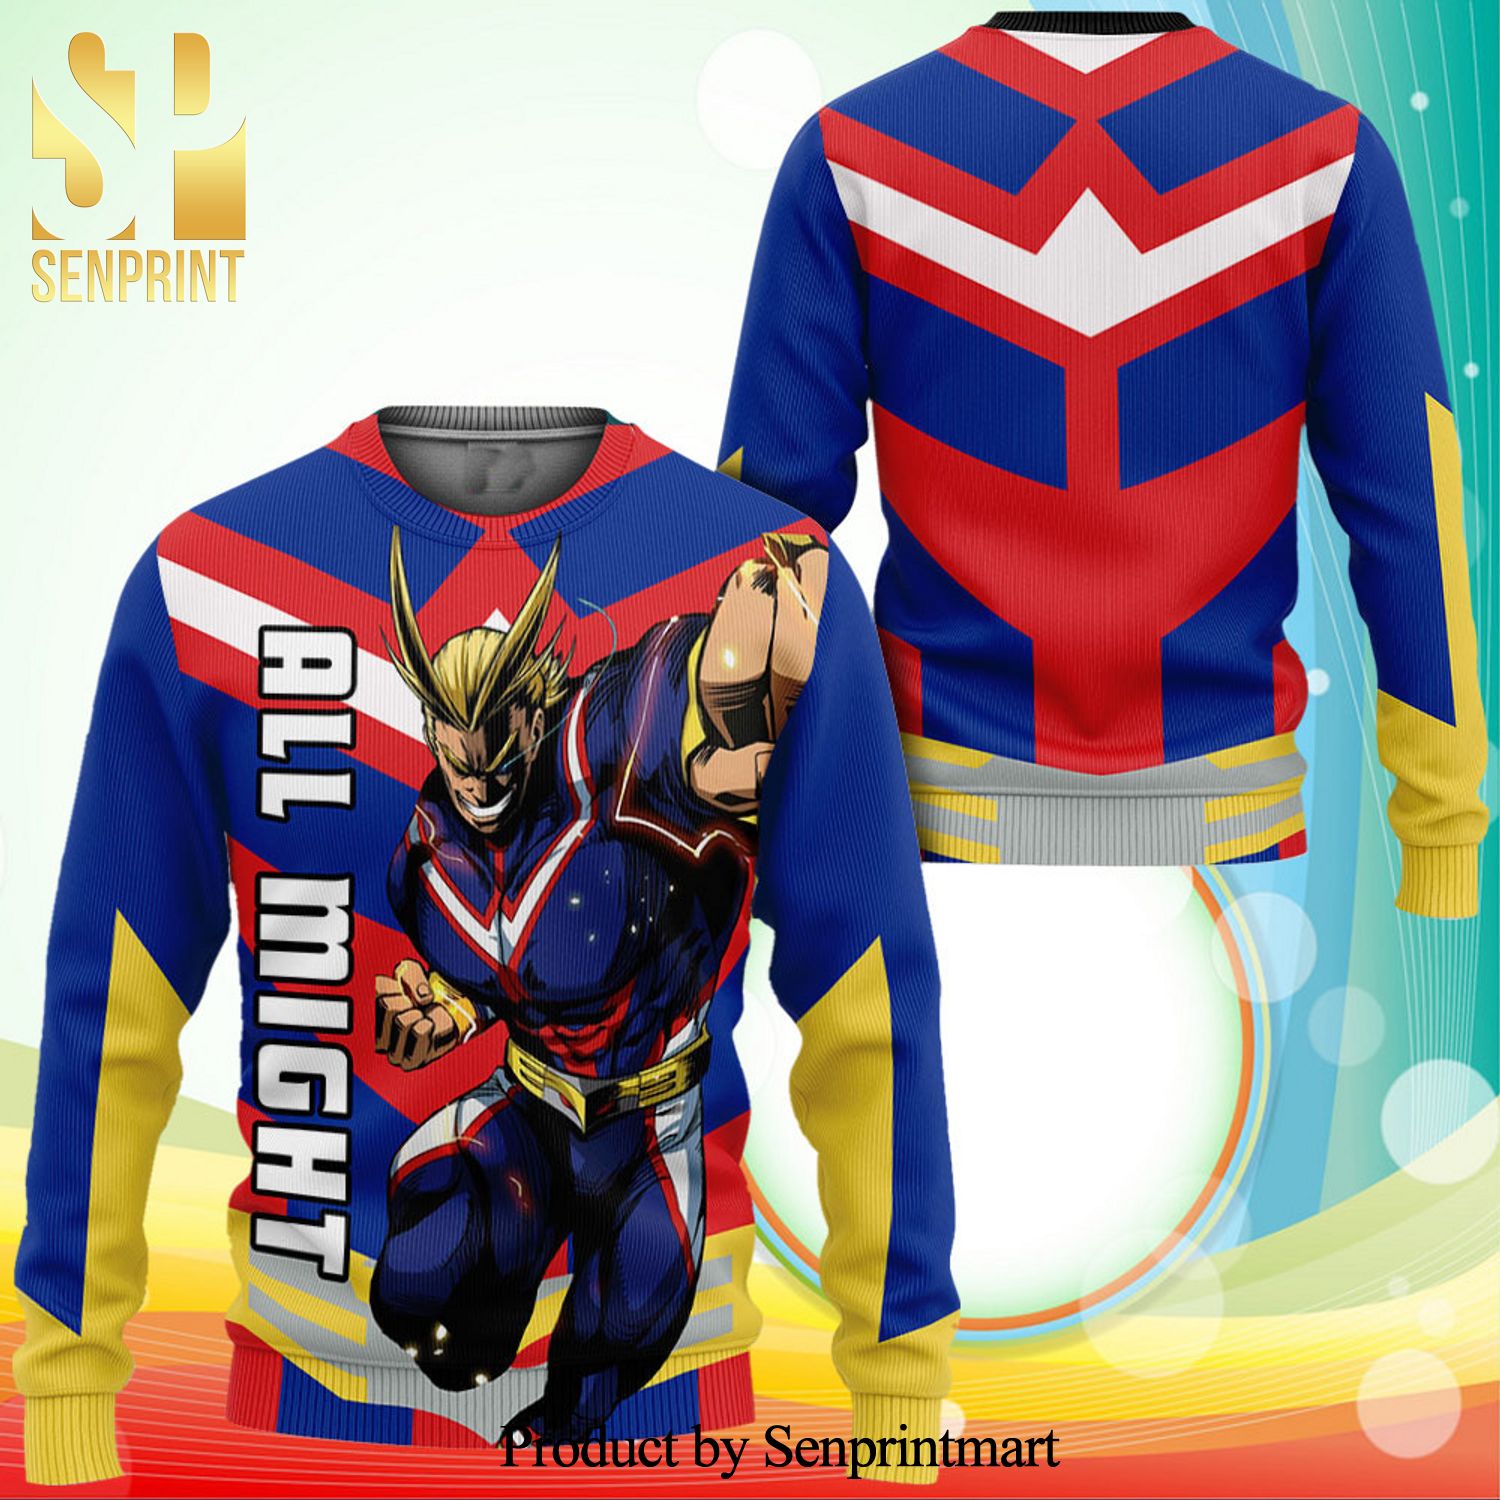 All Might My Hero Academia Anime MangaKnitted Ugly Christmas Sweater